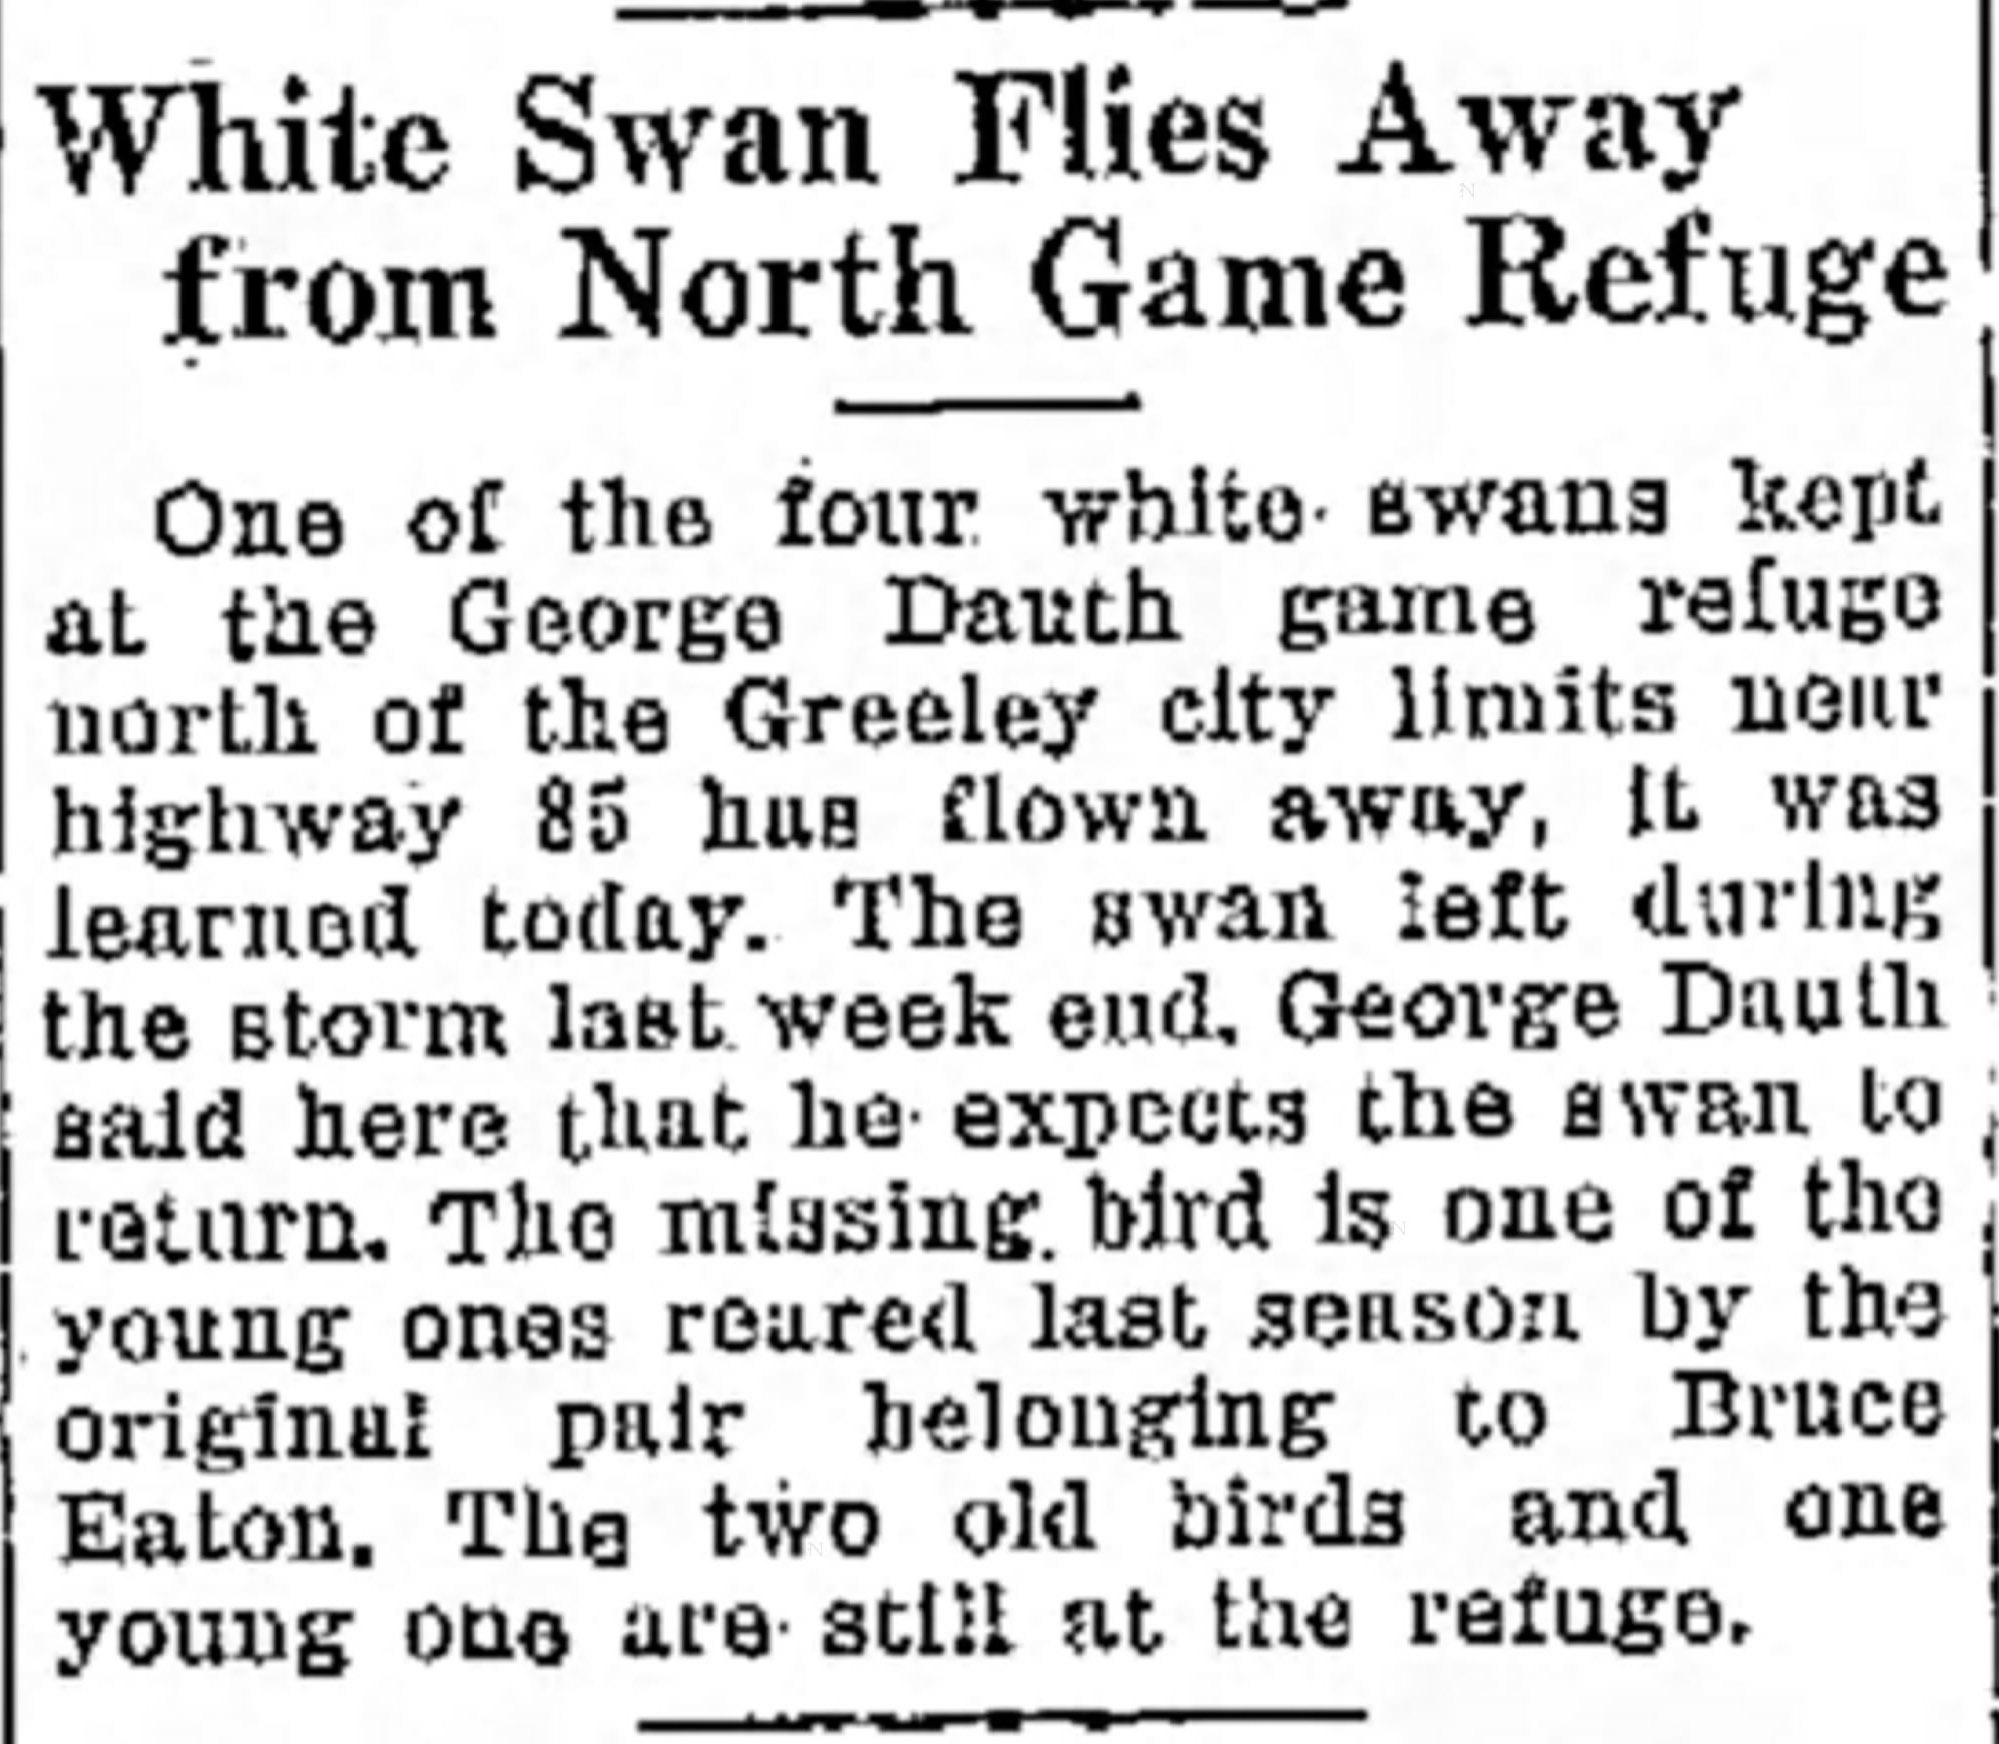 Dauth Family Archive - 1937-03-18 - Greeley Daily Tribune - George Dauths North Game Refuge